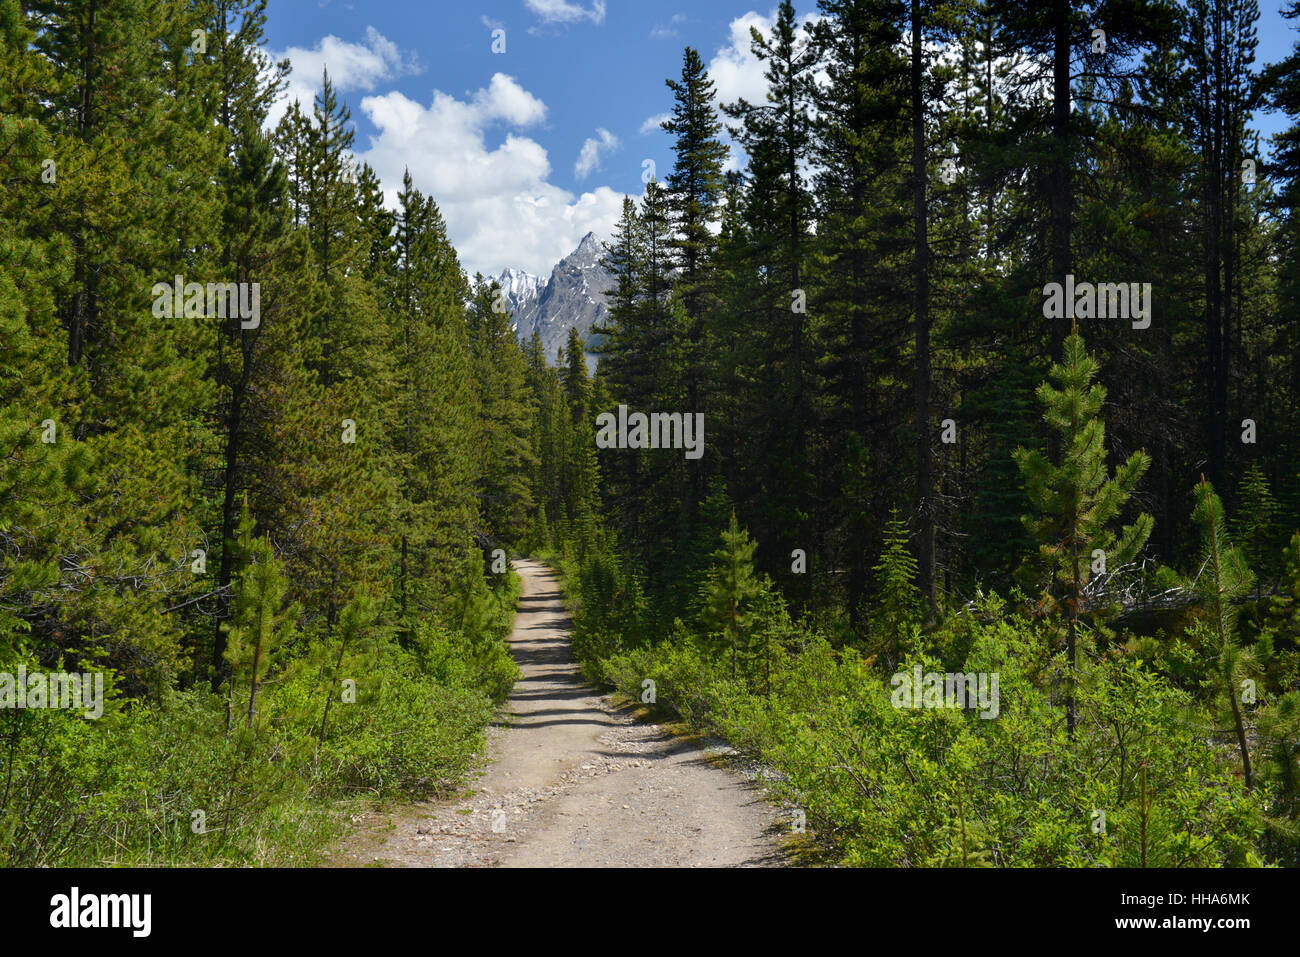 View from the path up to Bald Hills, Canadian Rockies Stock Photo